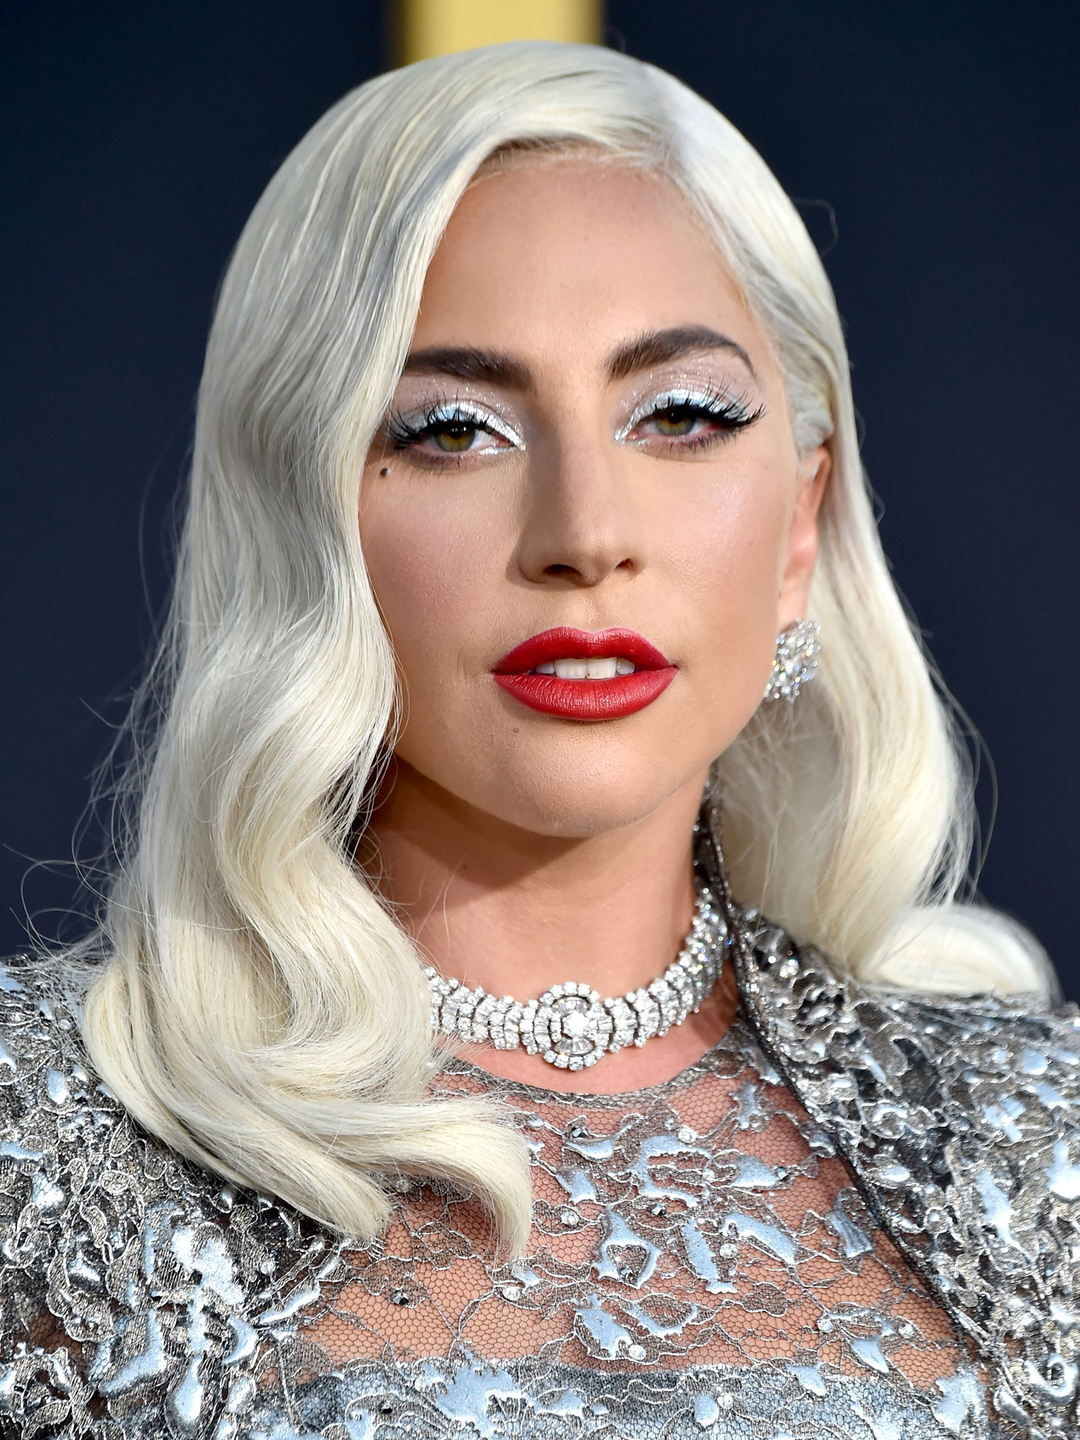 Lady Gaga who is her mother